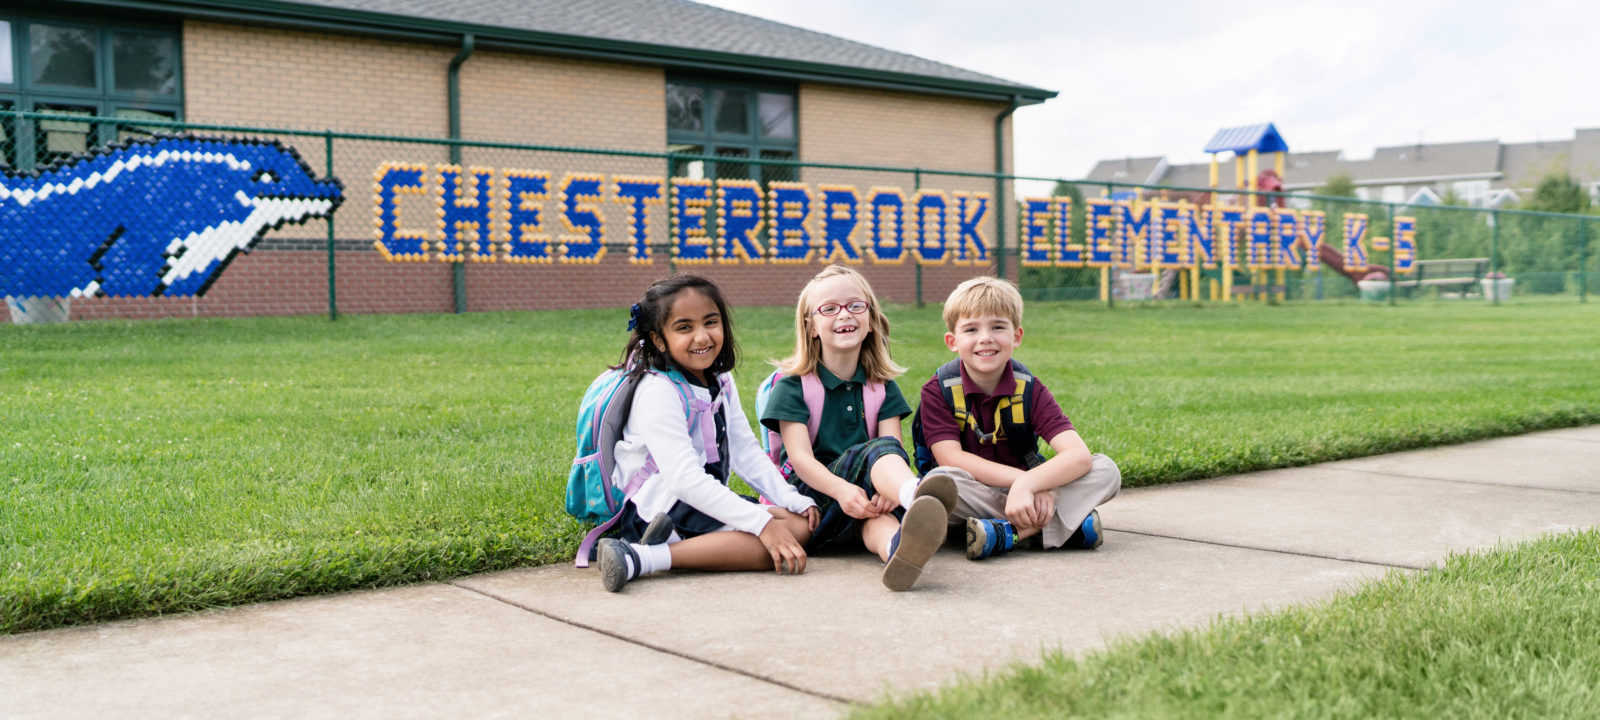 Chesterbrook Academy Elementary School in Naperville IL